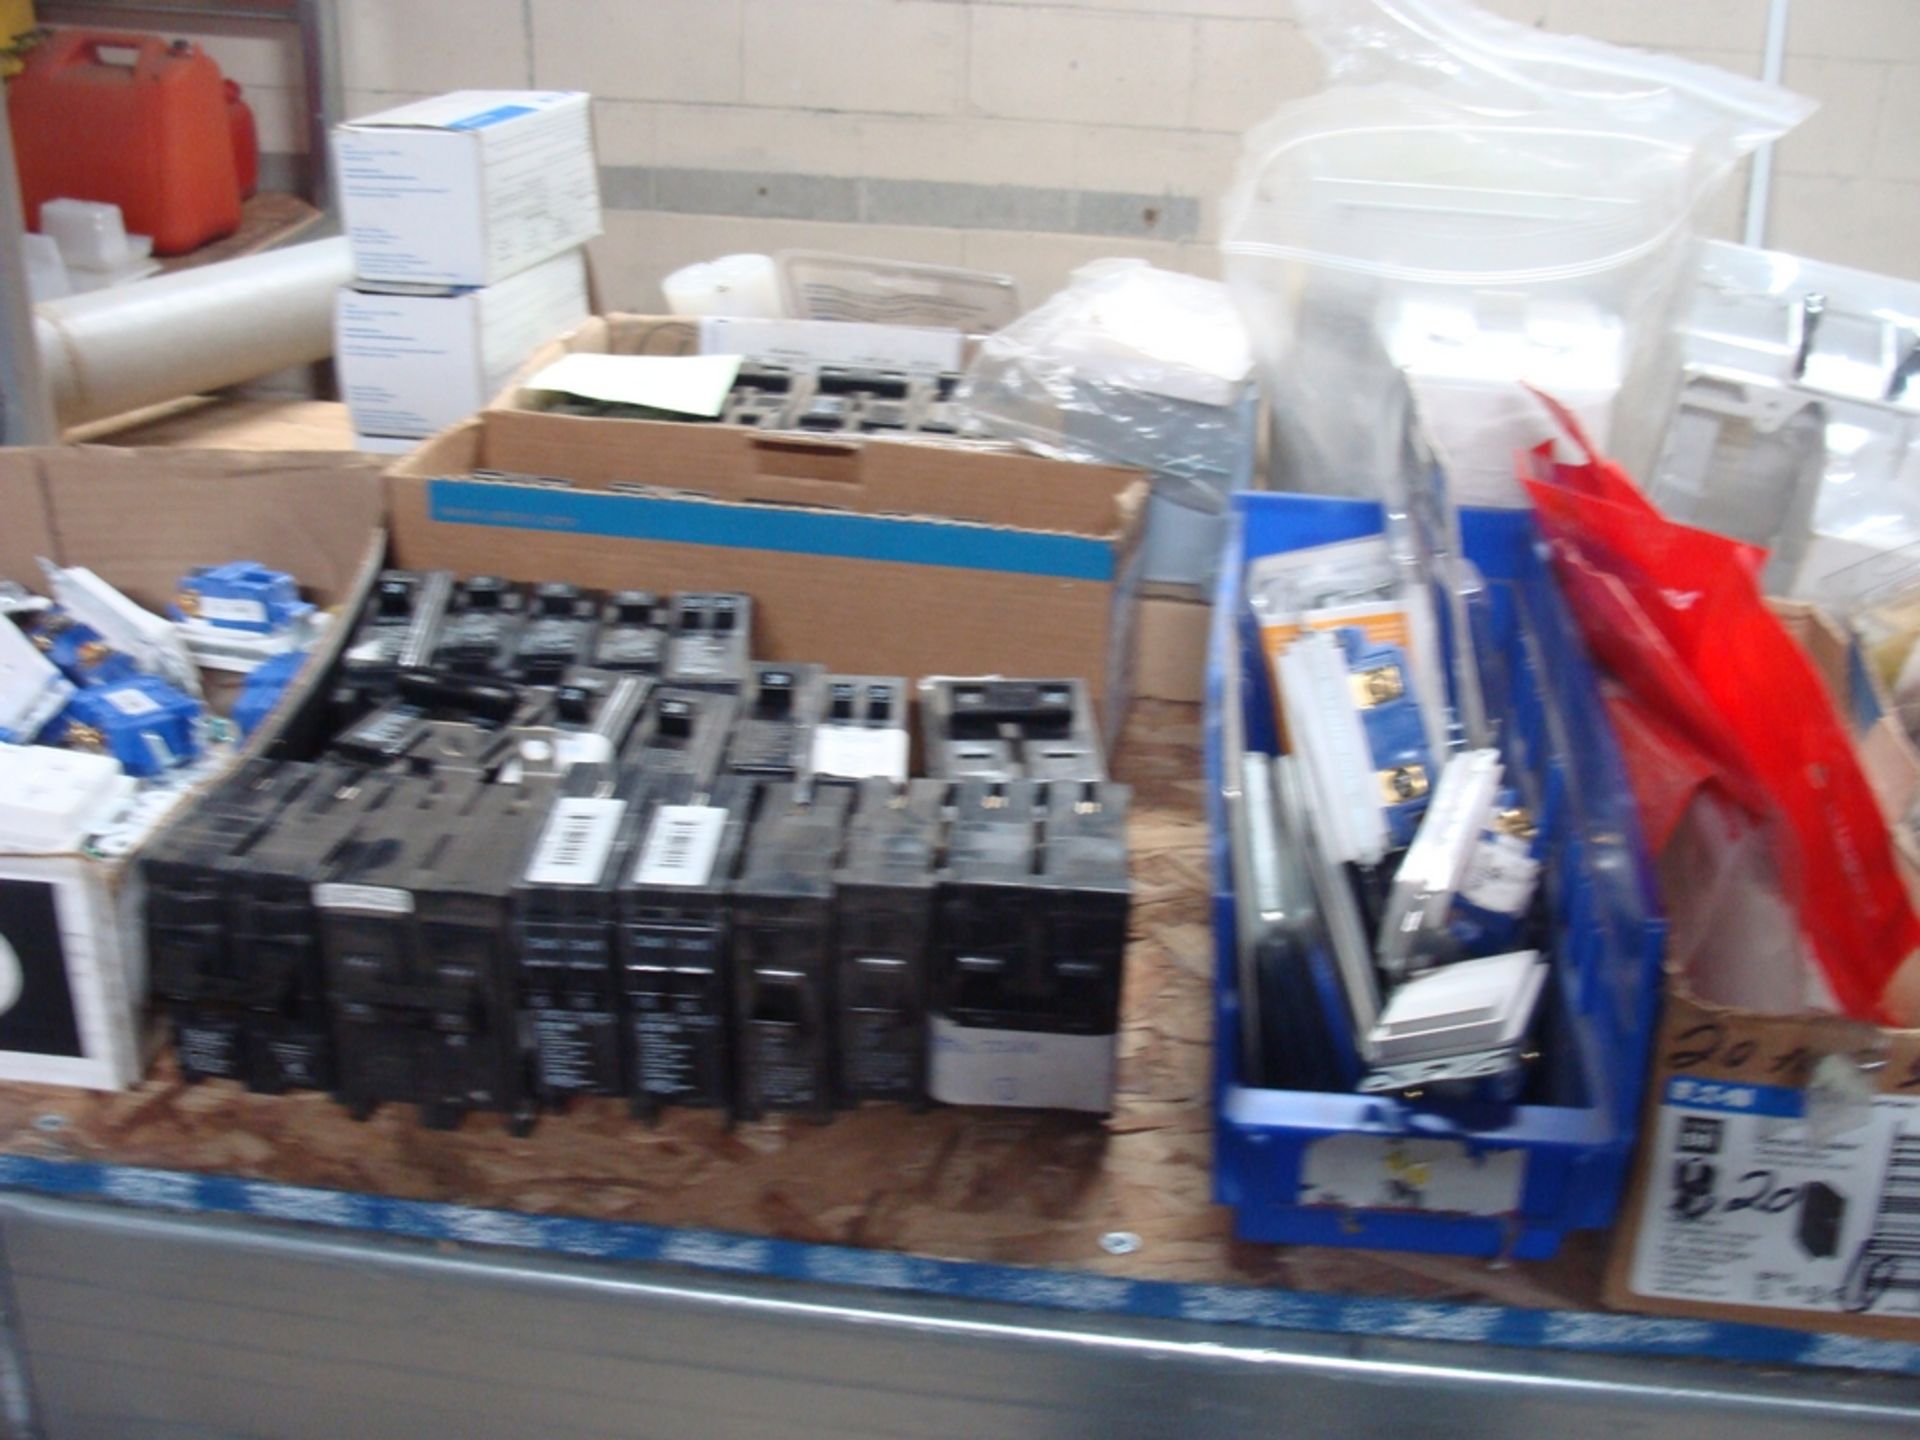 LOT OF ASST. OCTAGONAL BOXES, DEVIS BREAKER AND STUD BREAKER BOXES, CONNECTORS, COVERS, 600V - Image 3 of 9